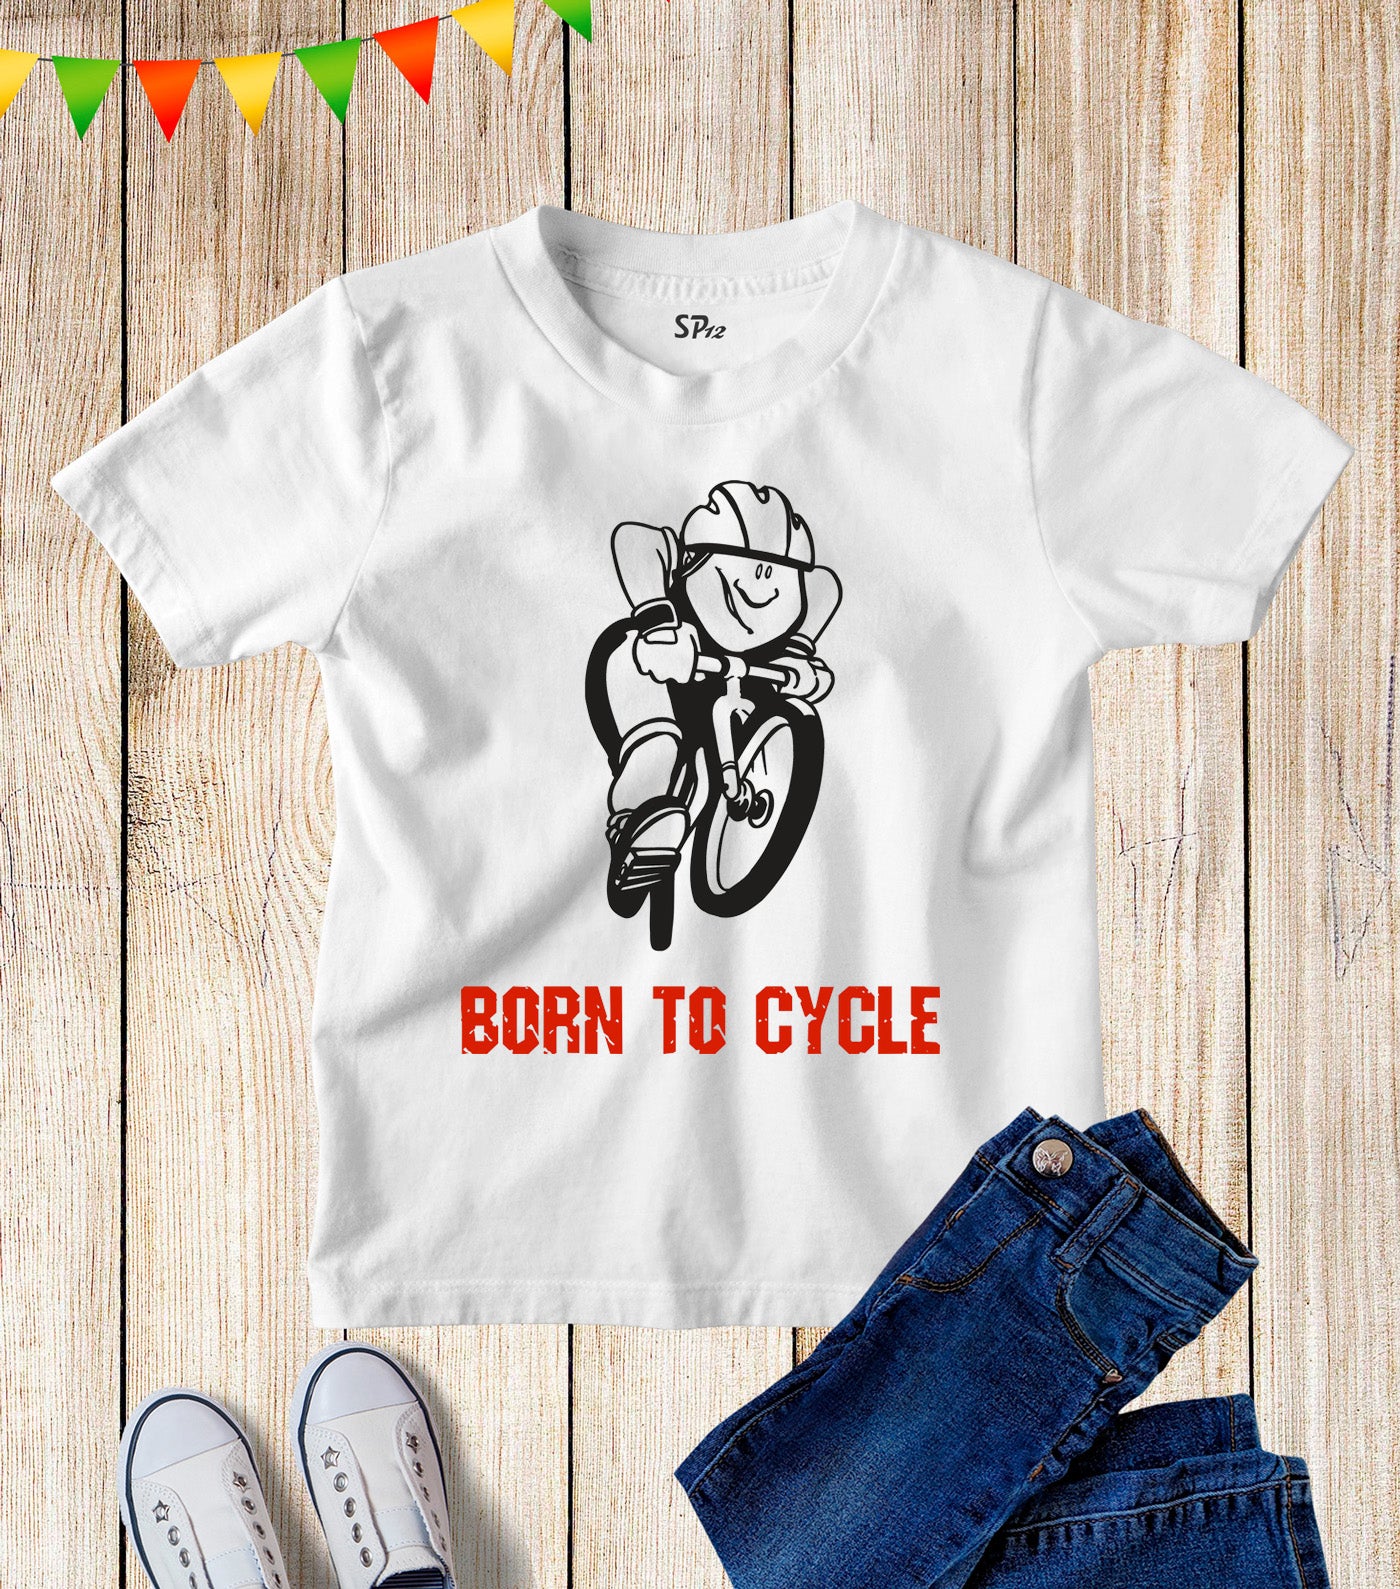 Born To Cycle Kids Hobby T Shirt